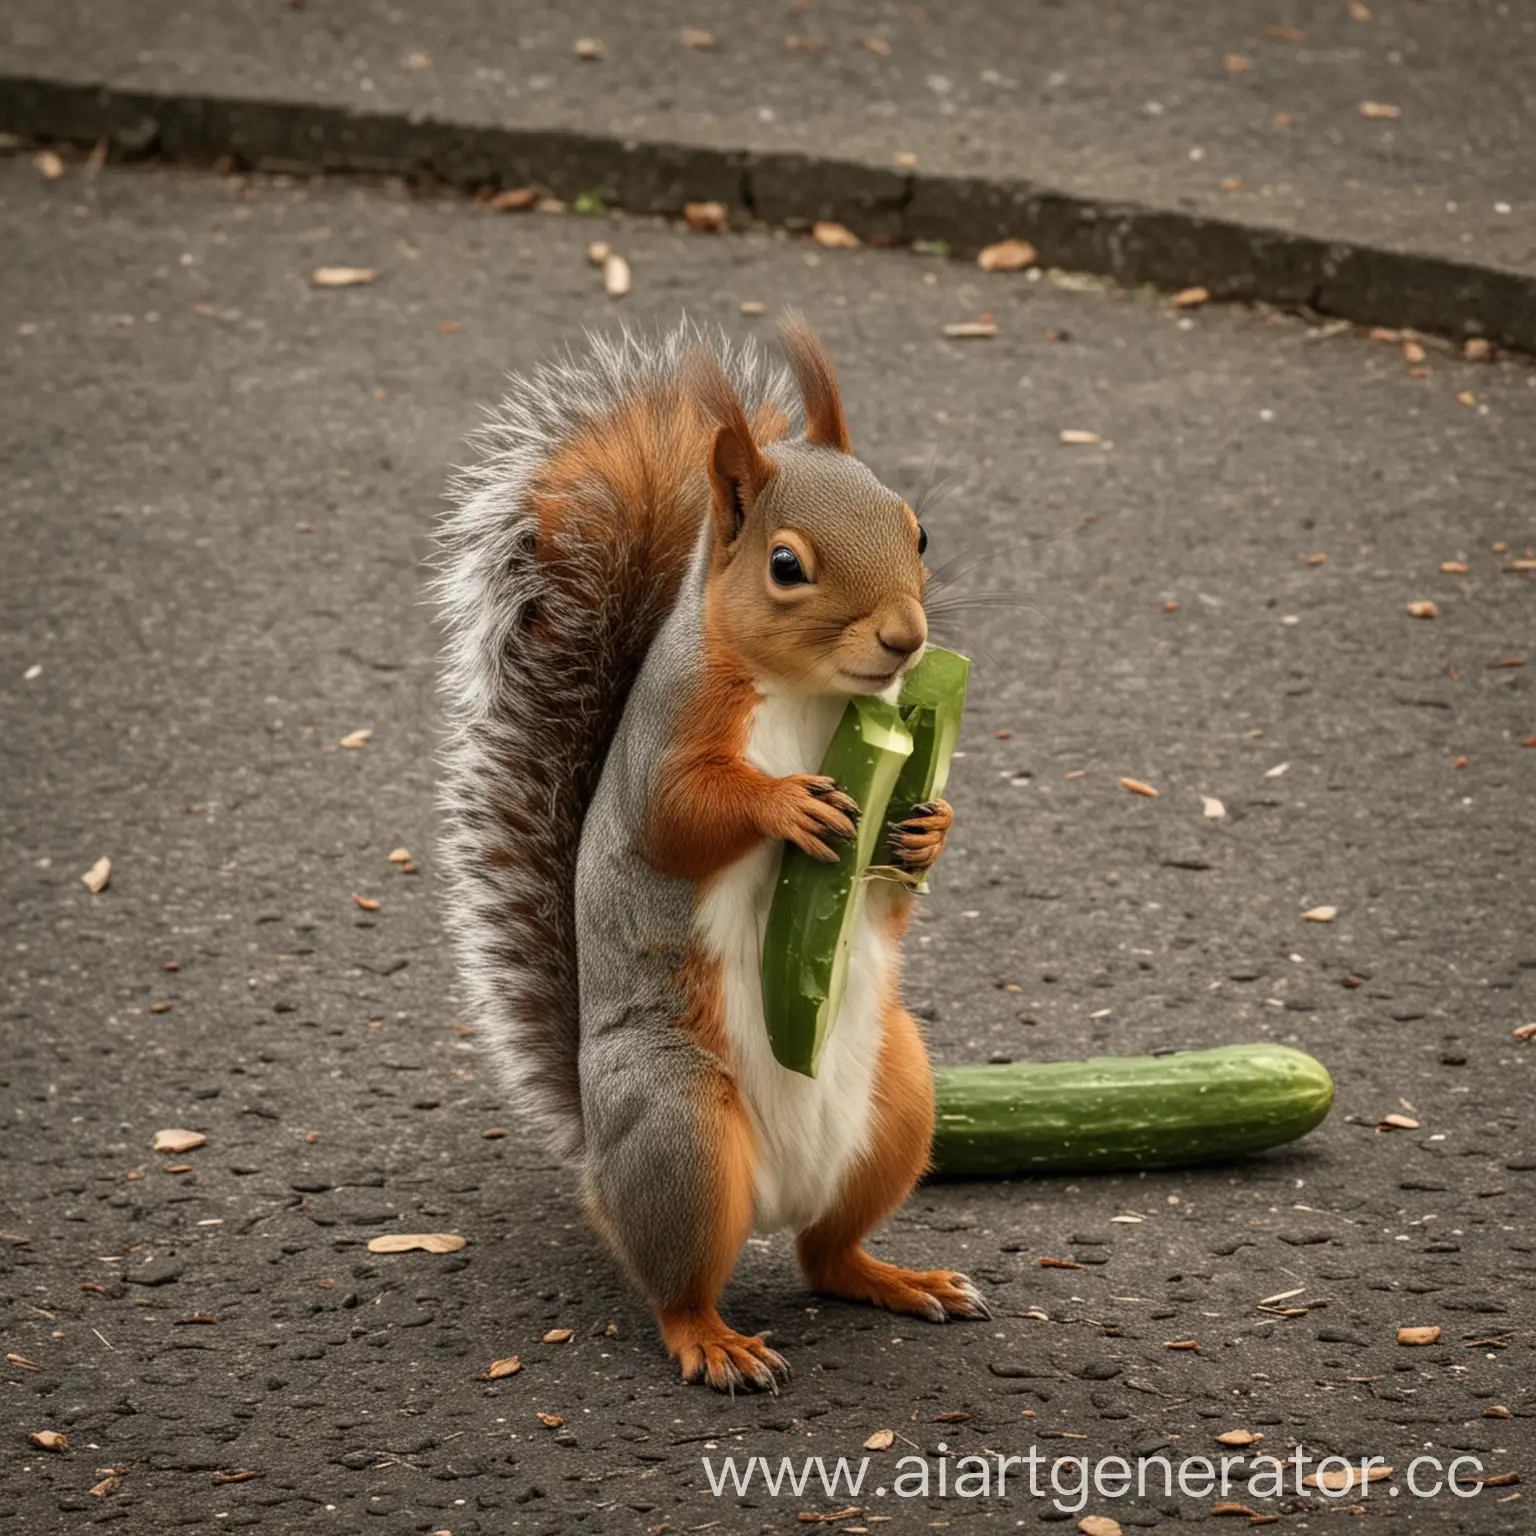 The squirrel goes to work in the morning and feels like a cucumber.